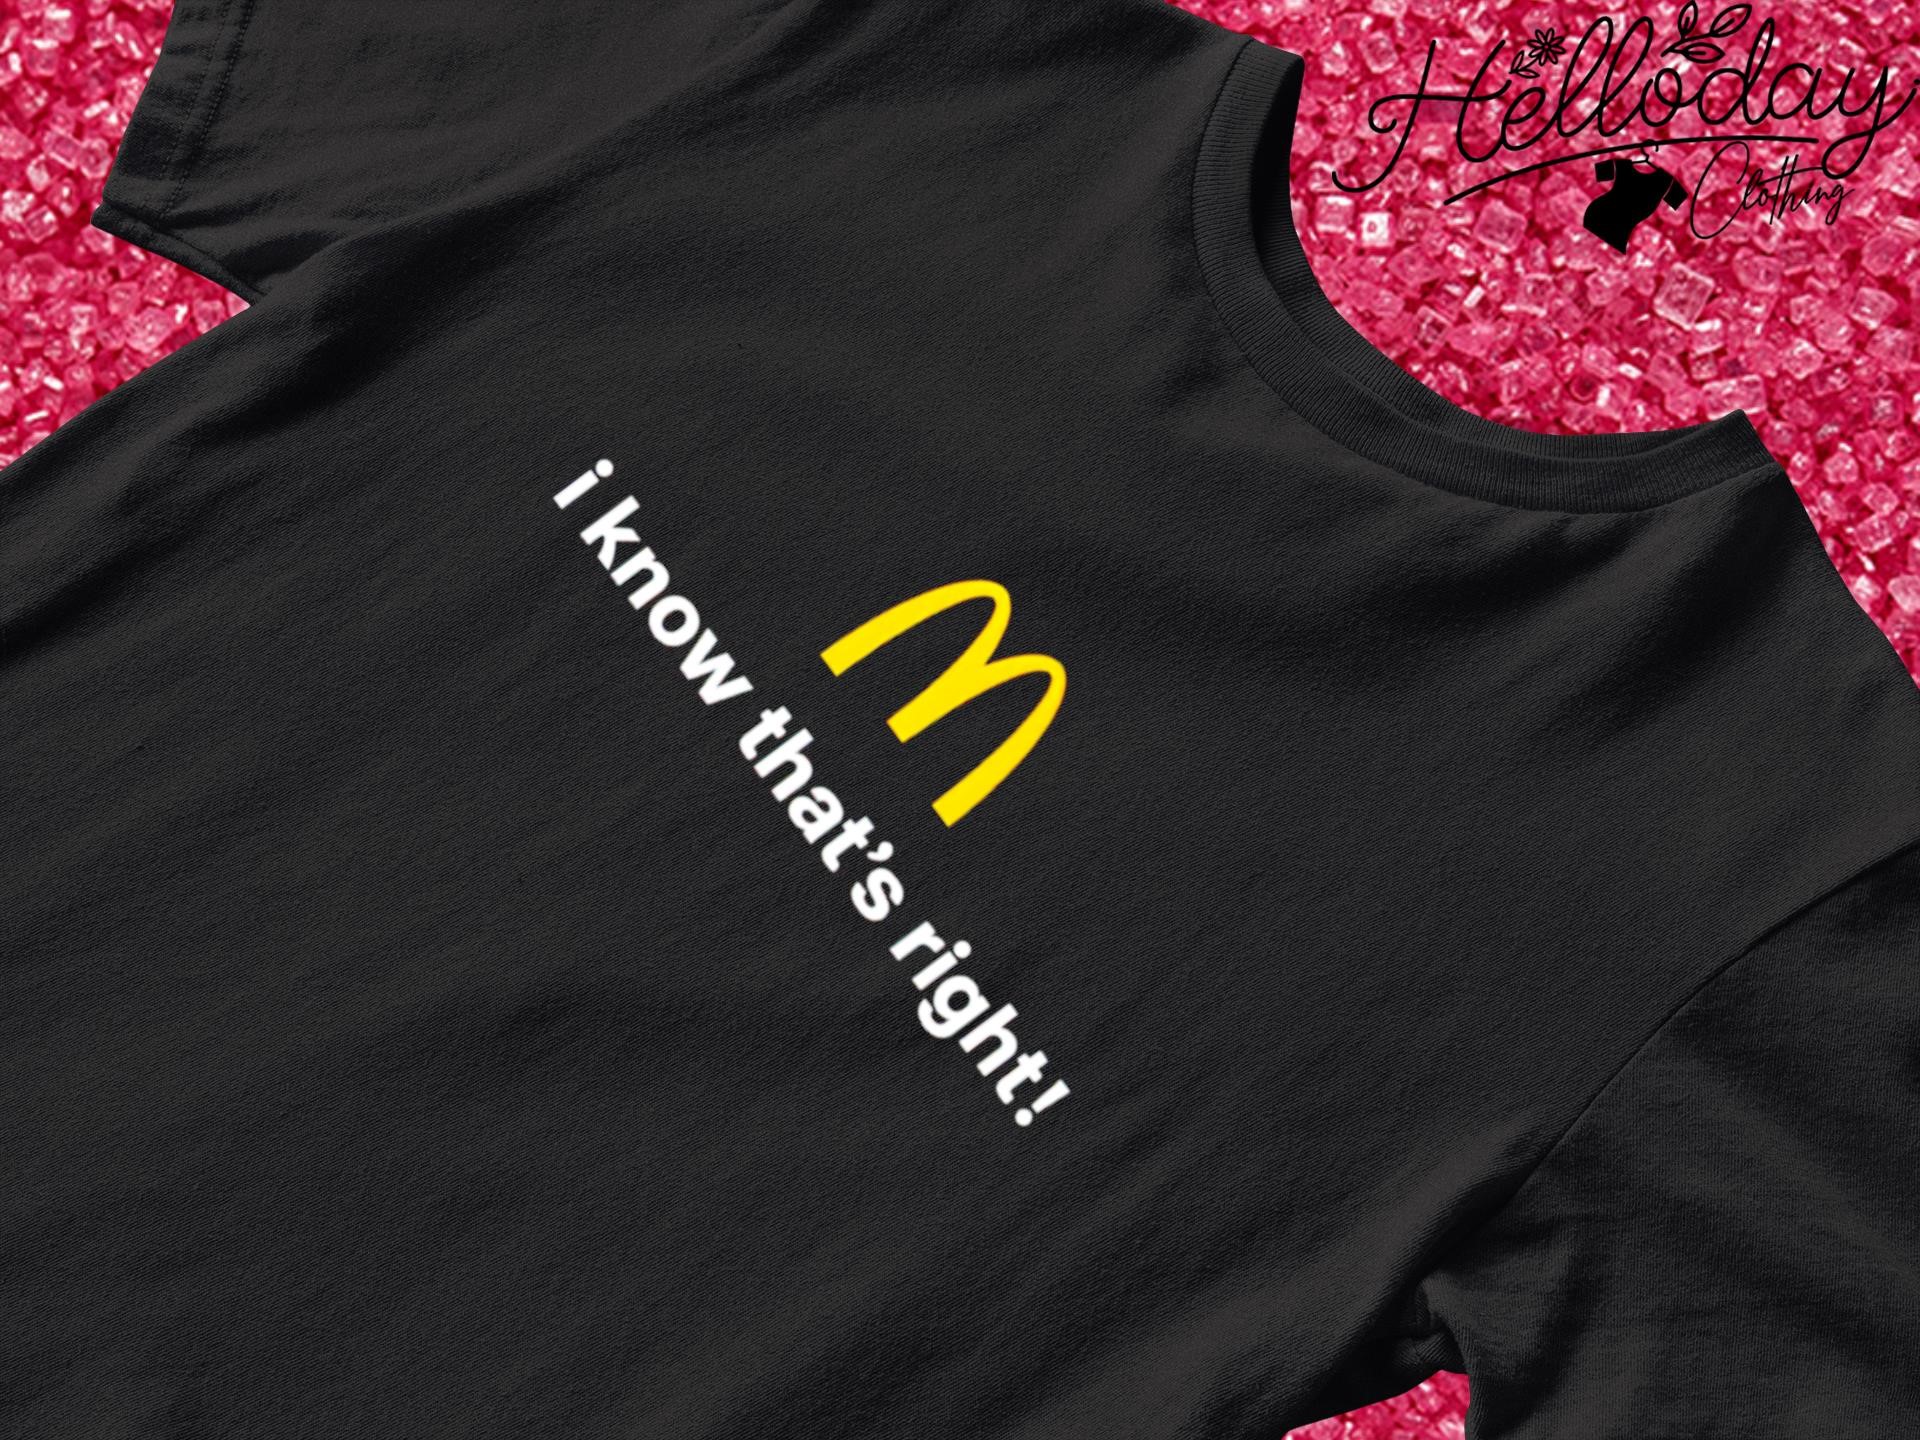 McDonald's I know that's right shirt